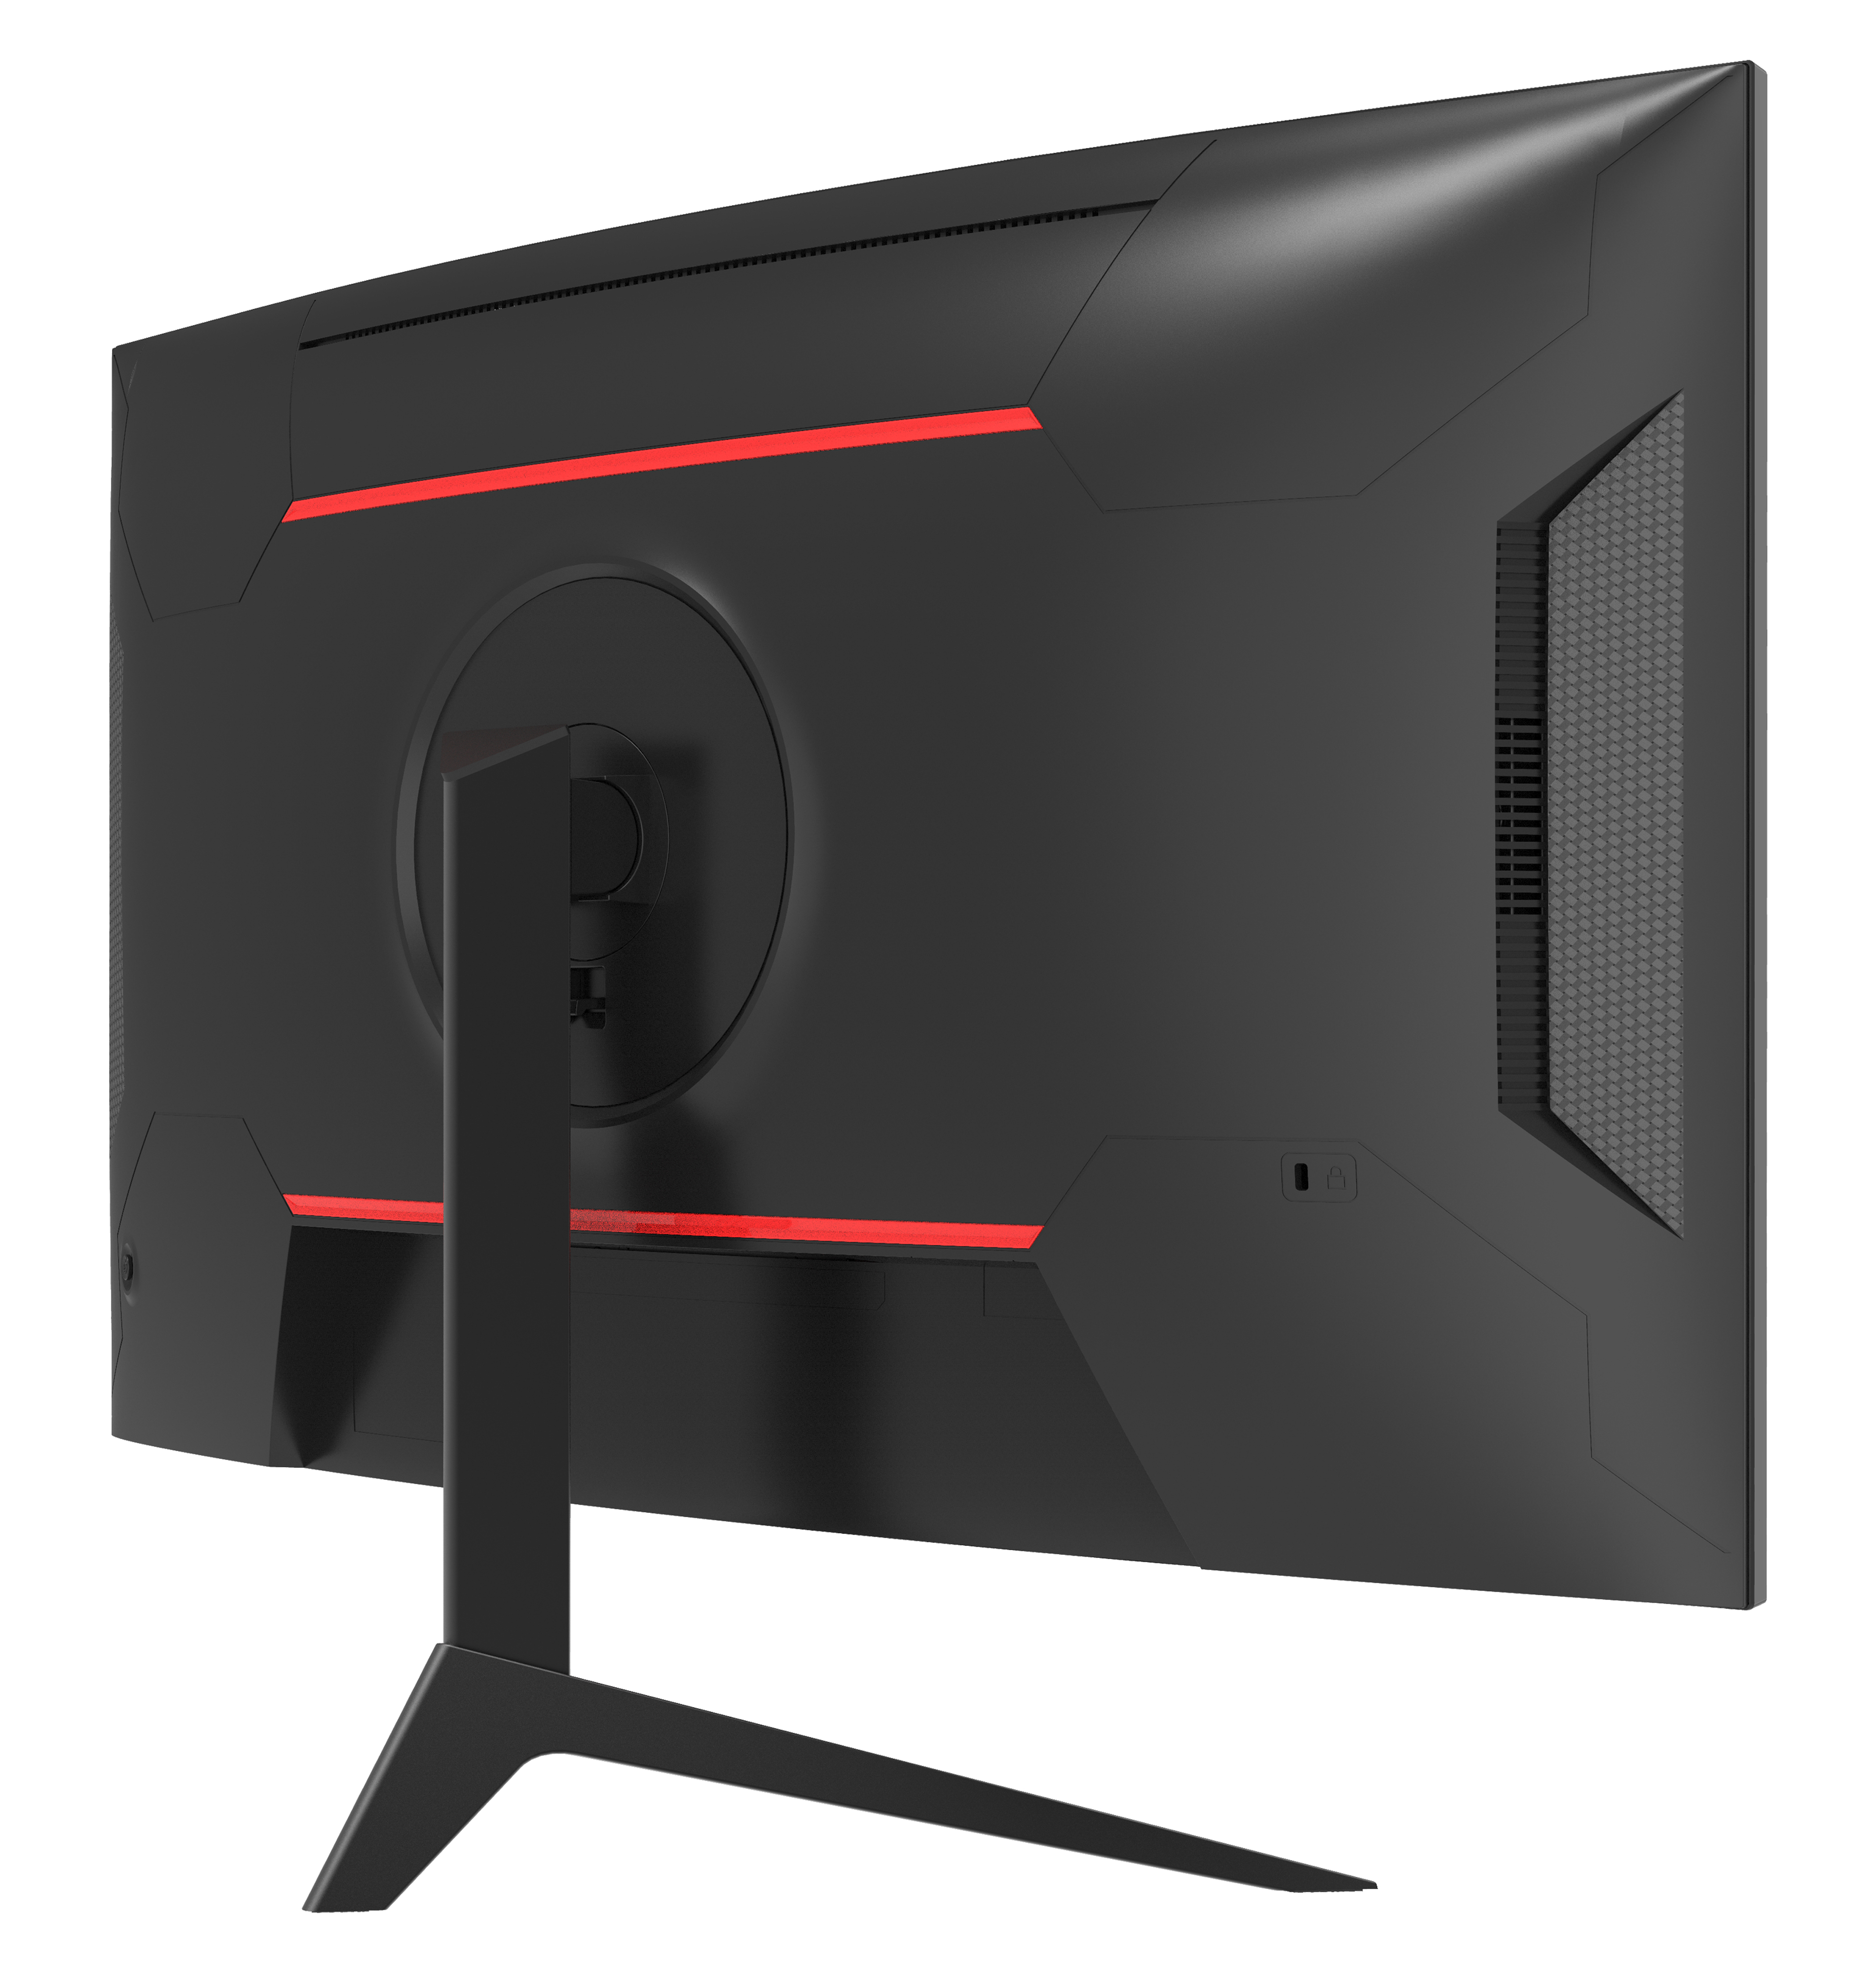 165 Monitor Hz (1 Zoll POWER 27 Full-HD ms Gaming Reaktionszeit LC-M27-FHD-165-C-V3 ) , LC